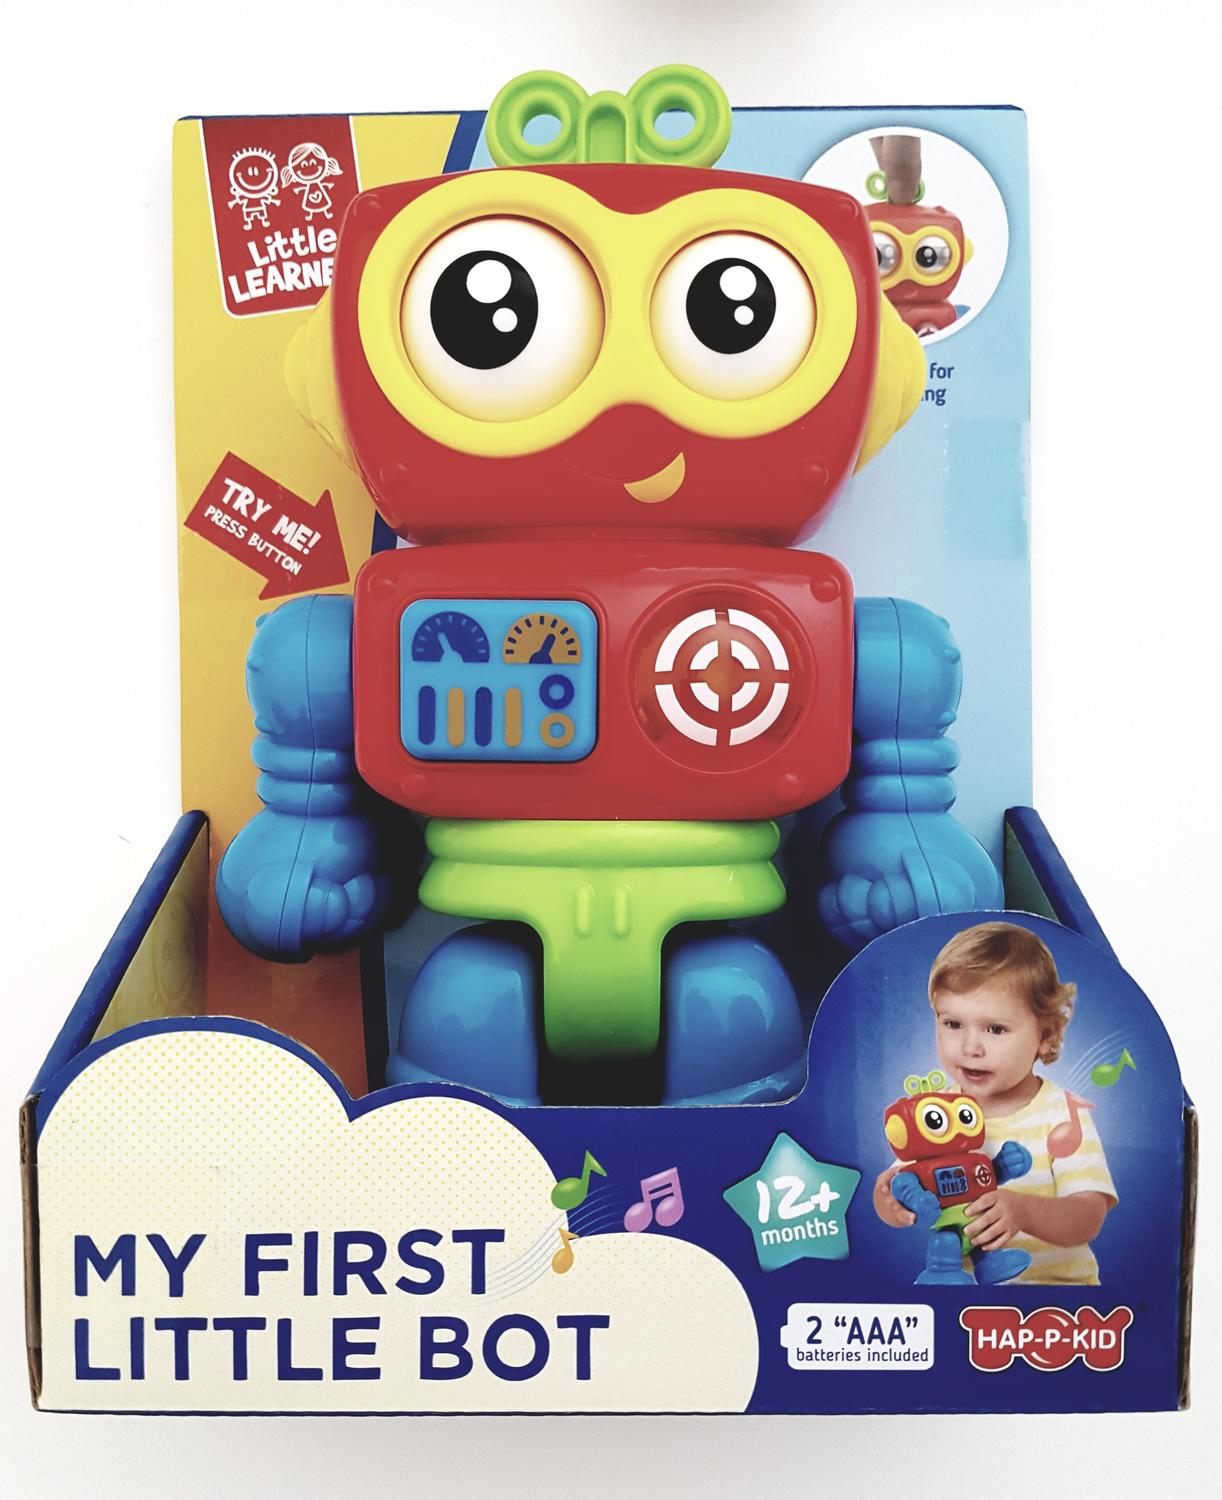 Jucarie interactiva – Primul meu robotel PlayLearn Toys